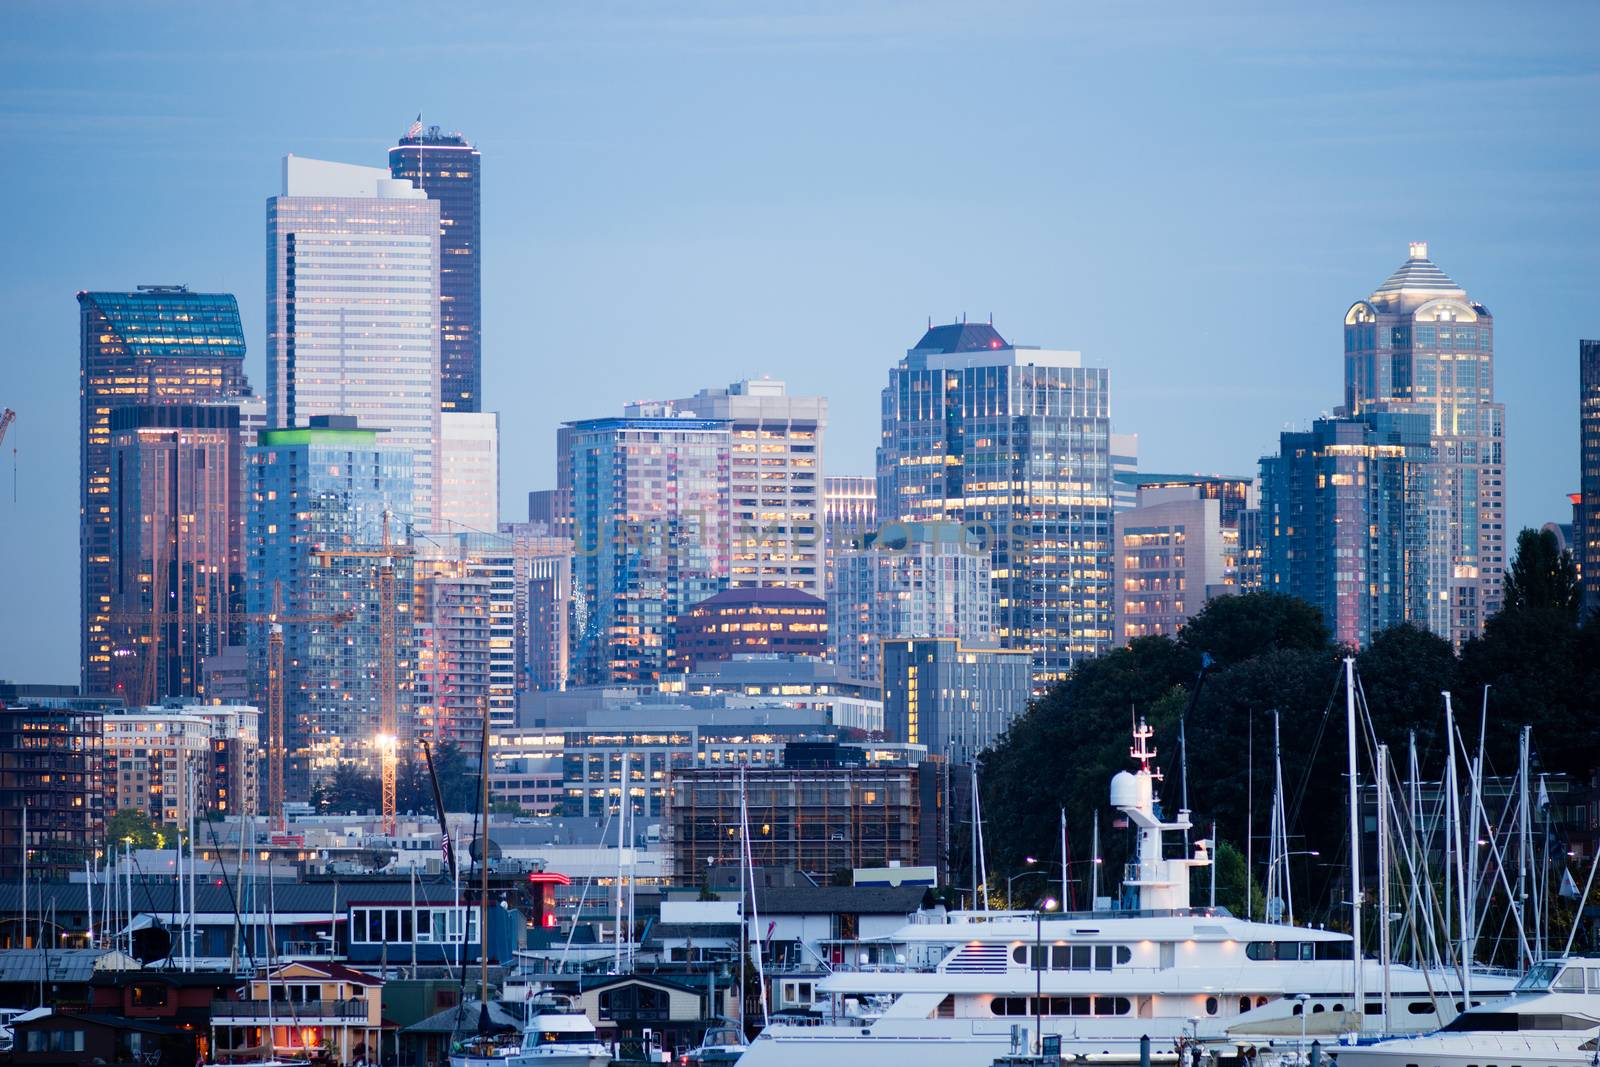 Luxury Yachts Boats Lake Union Seattle Downtown City Skyline by ChrisBoswell